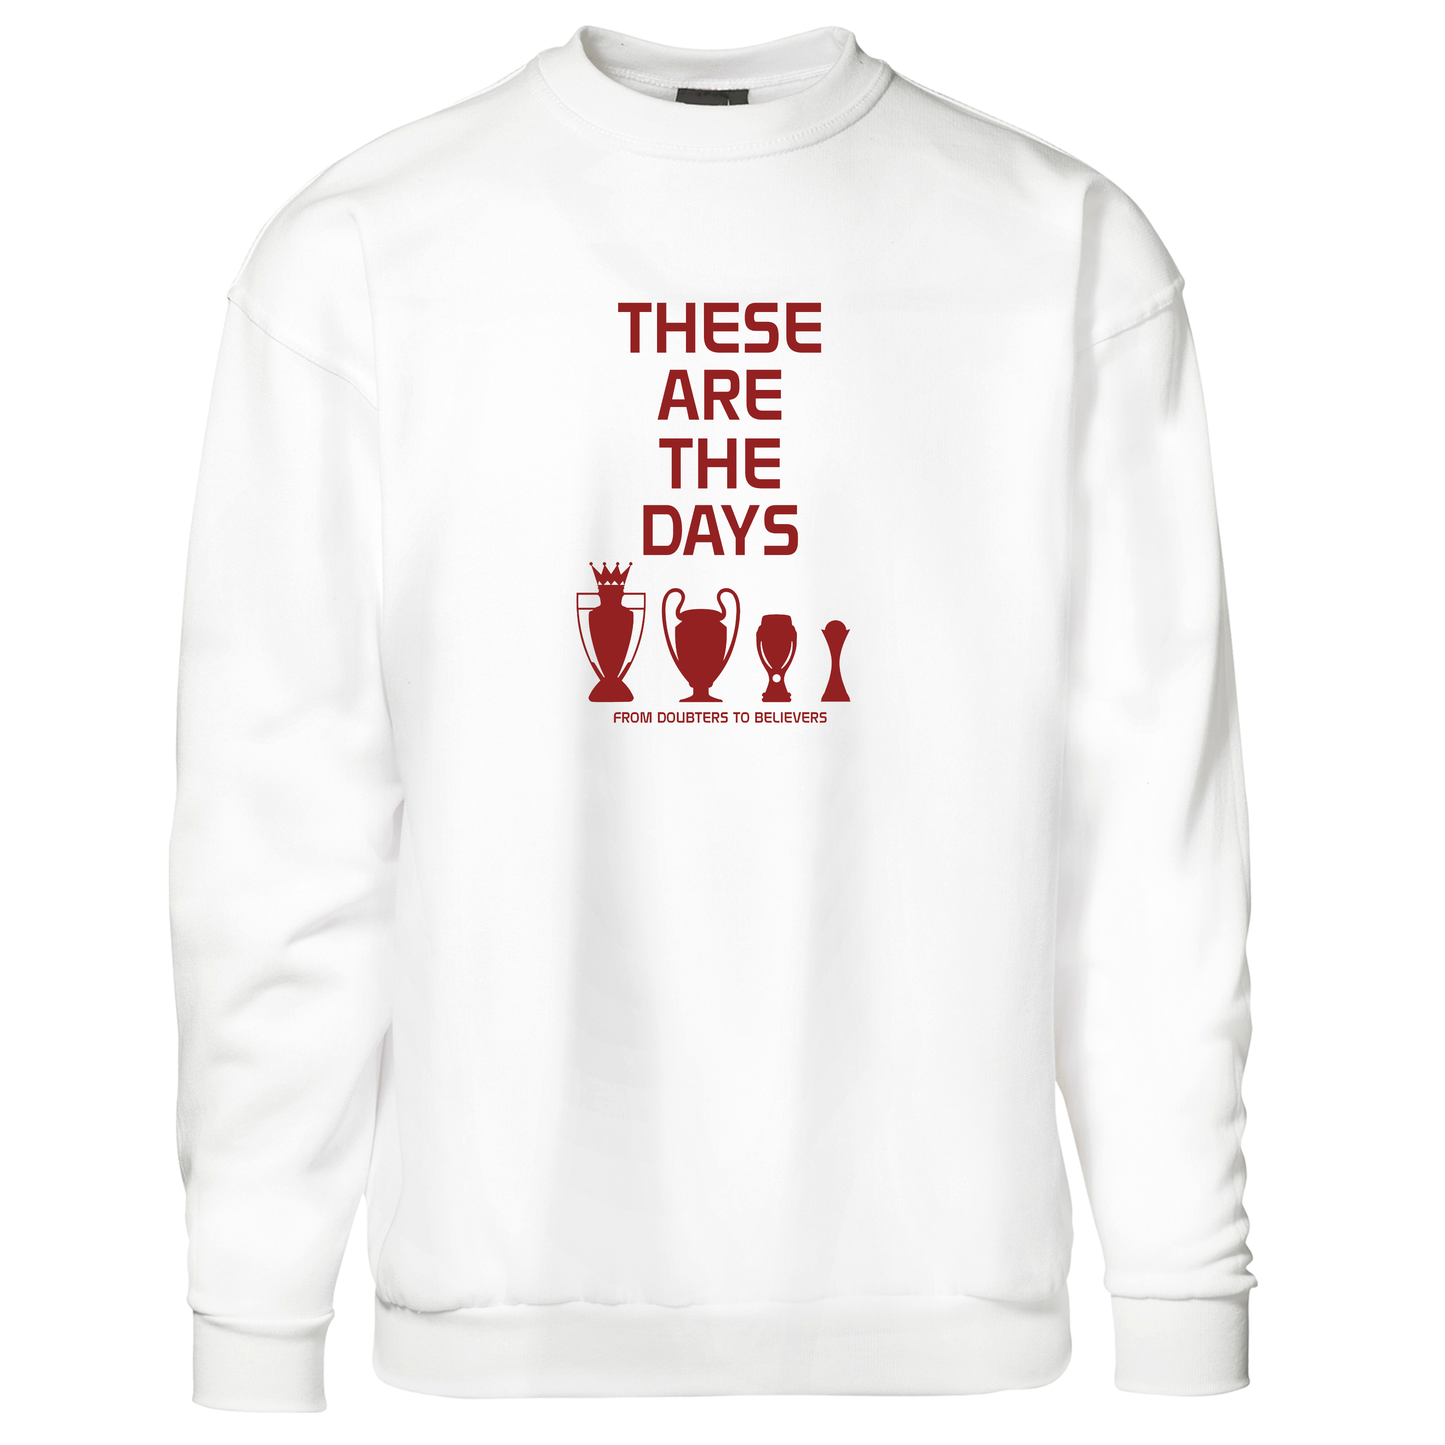 These Are The Days - Sweatshirt - Børn